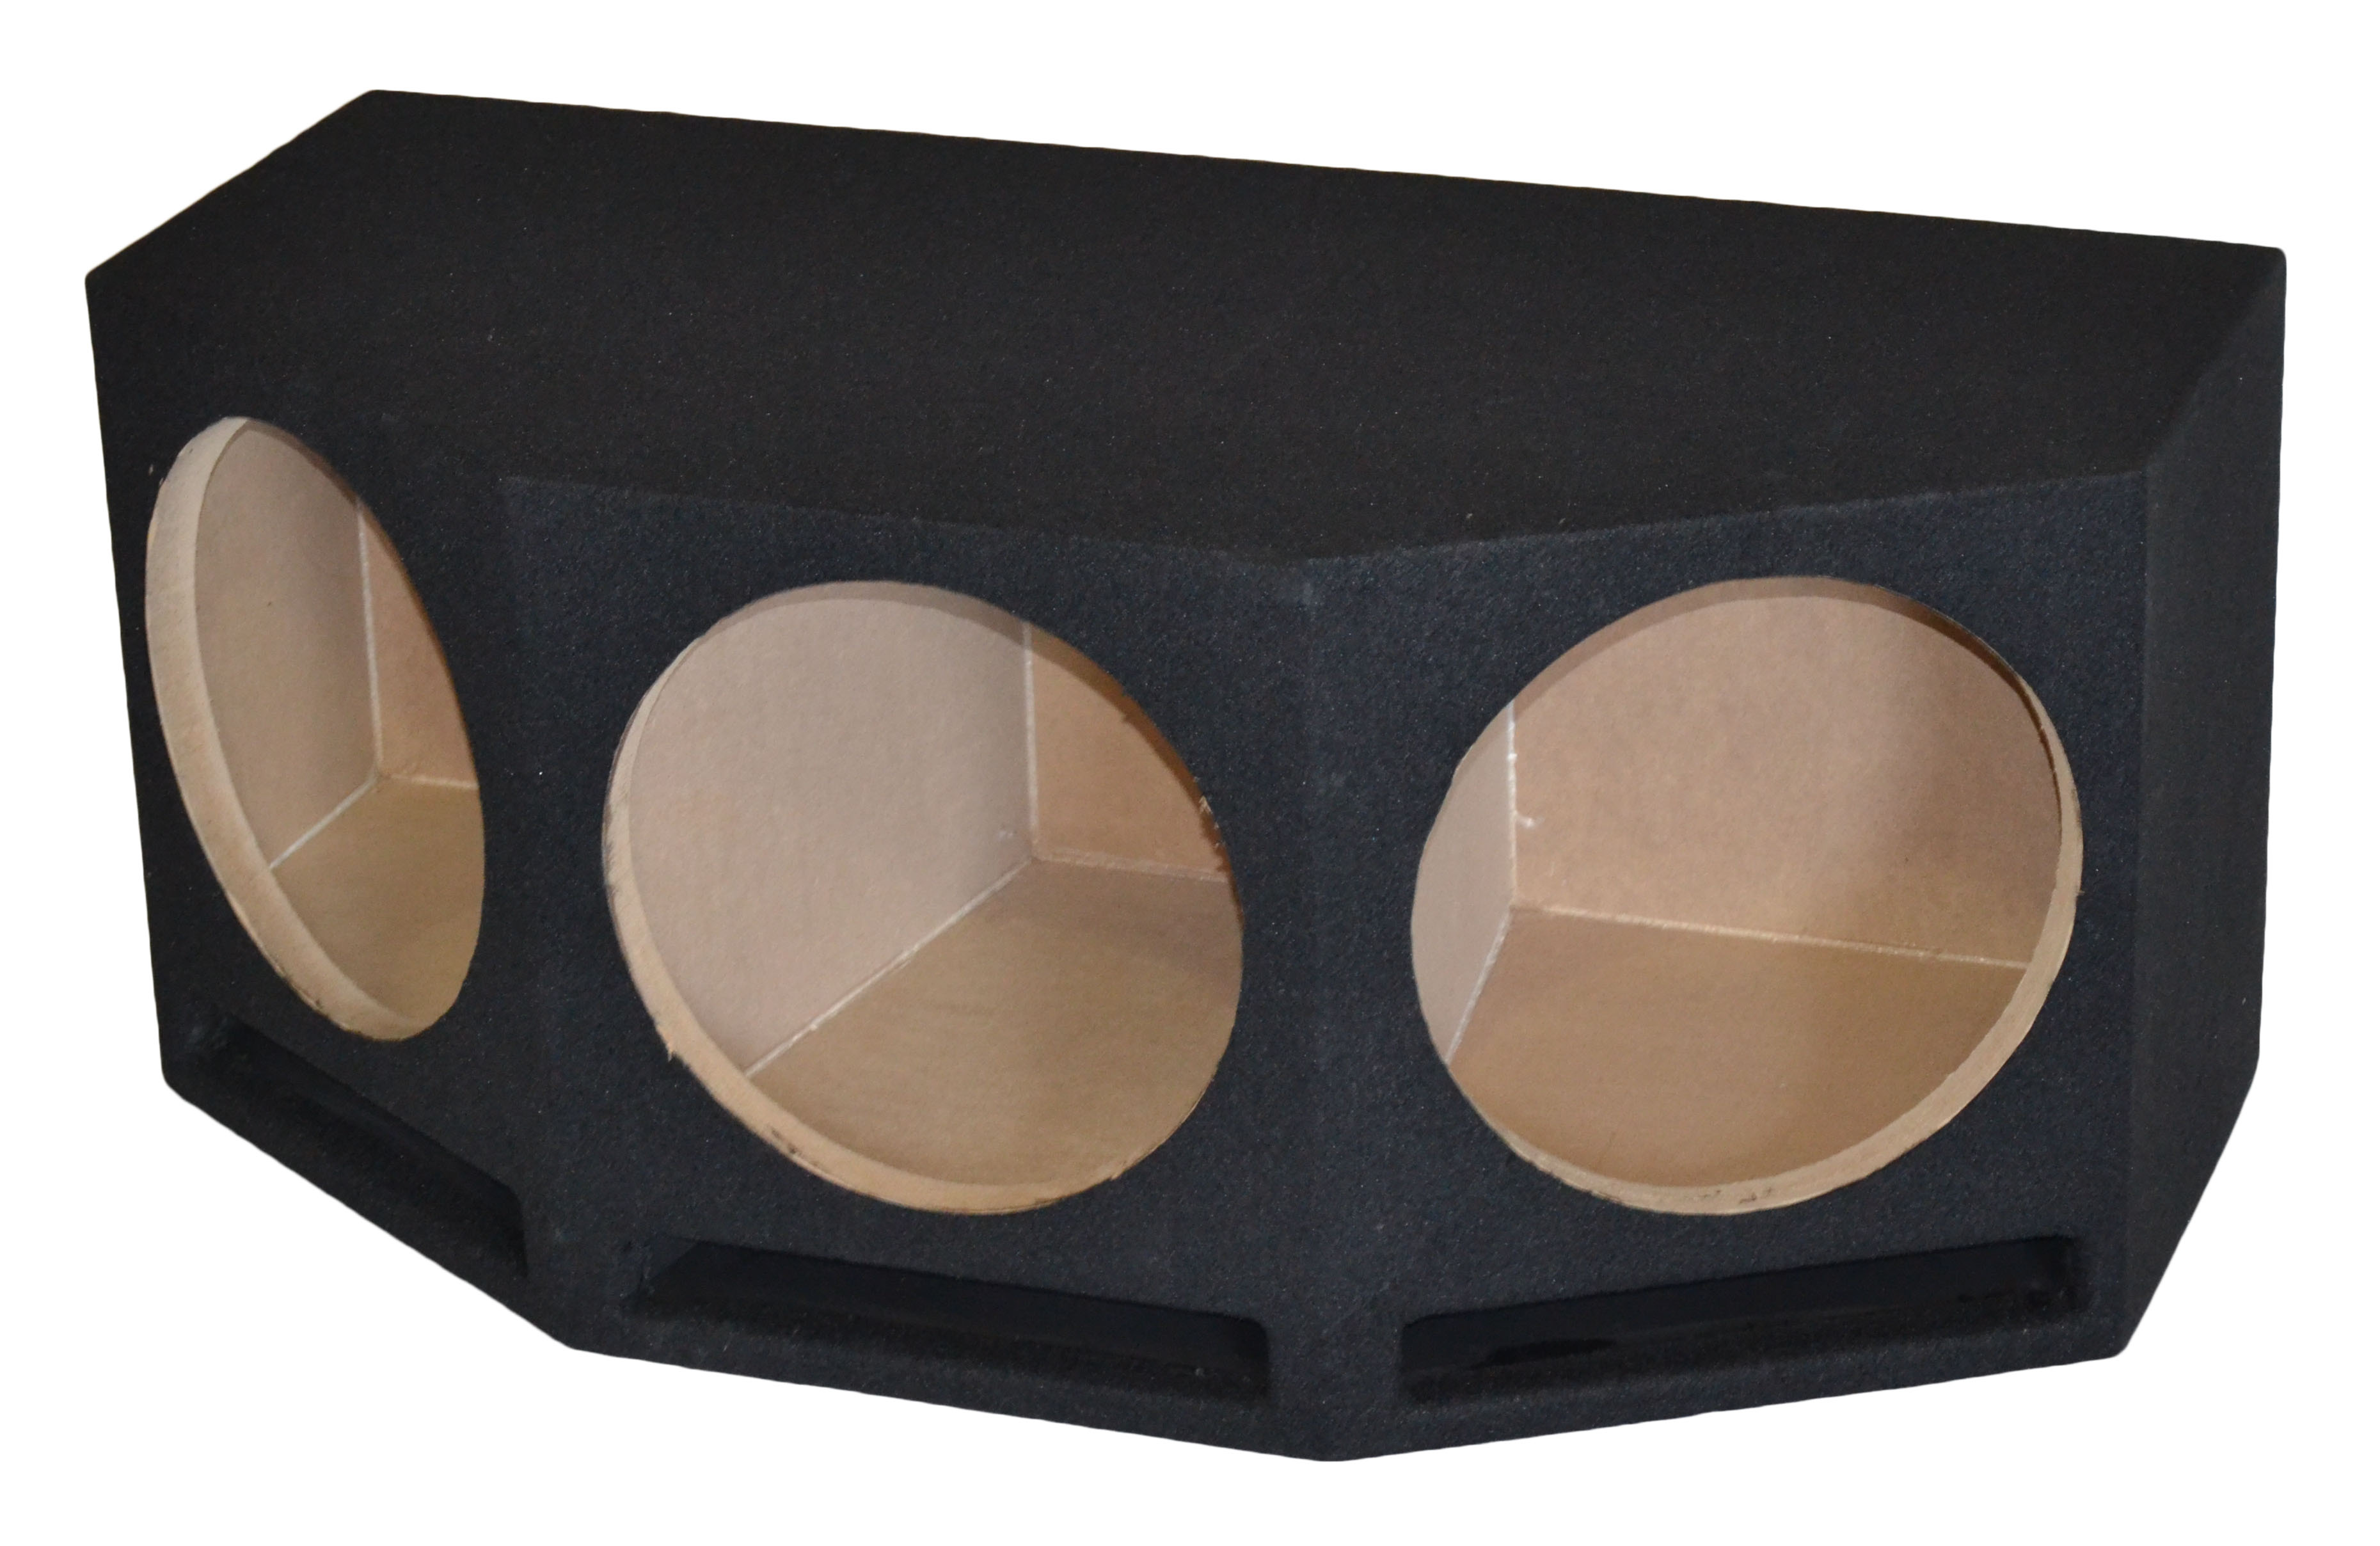 triple 10 inch subwoofer box ported